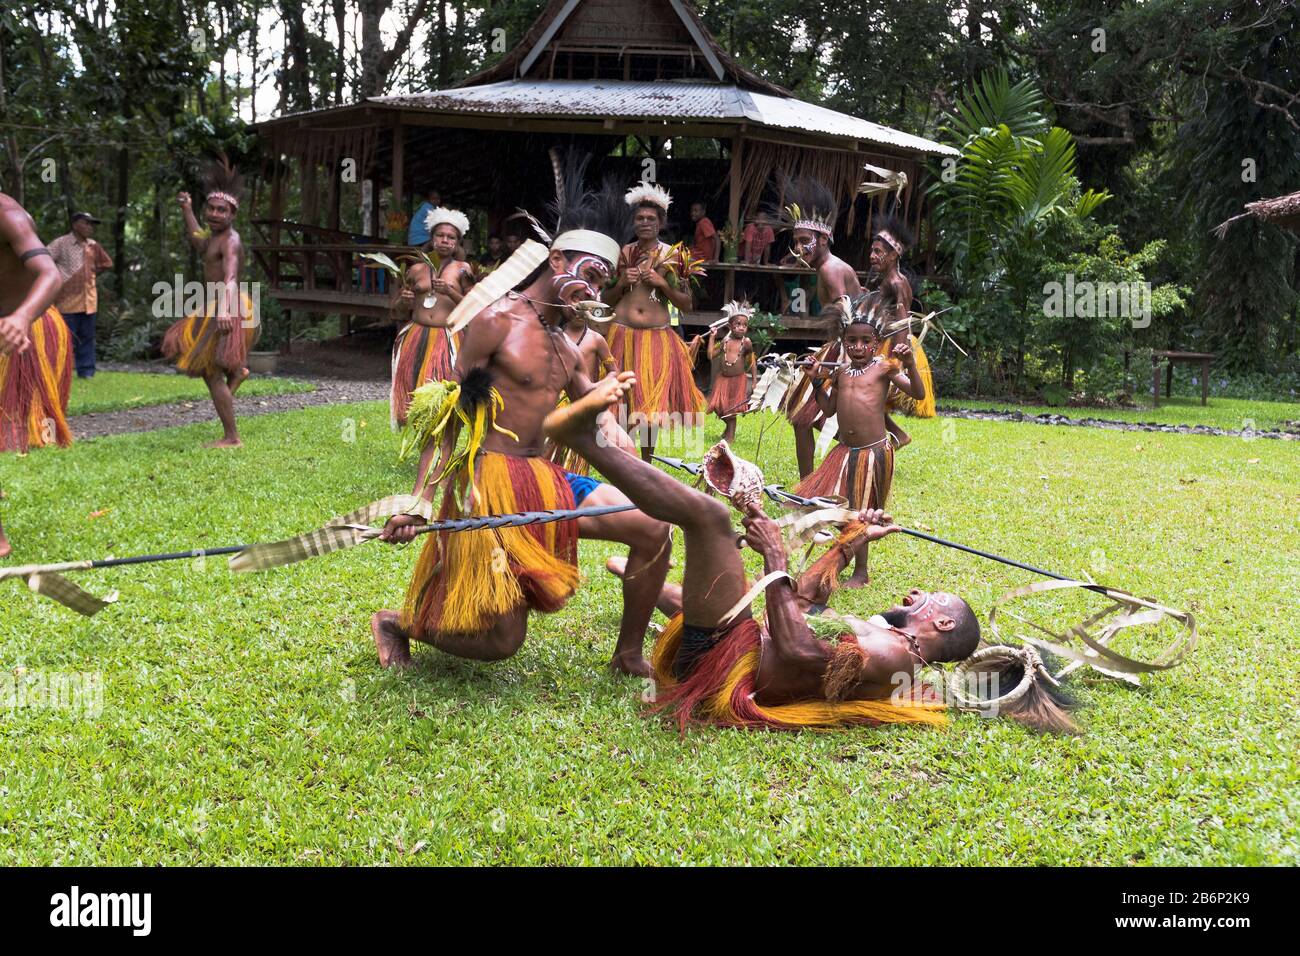 dh Local dancing tribesmen ALOTAU PAPUA NEW GUINEA Traditional PNG village native dancers war dance culture tribe weapons Stock Photo